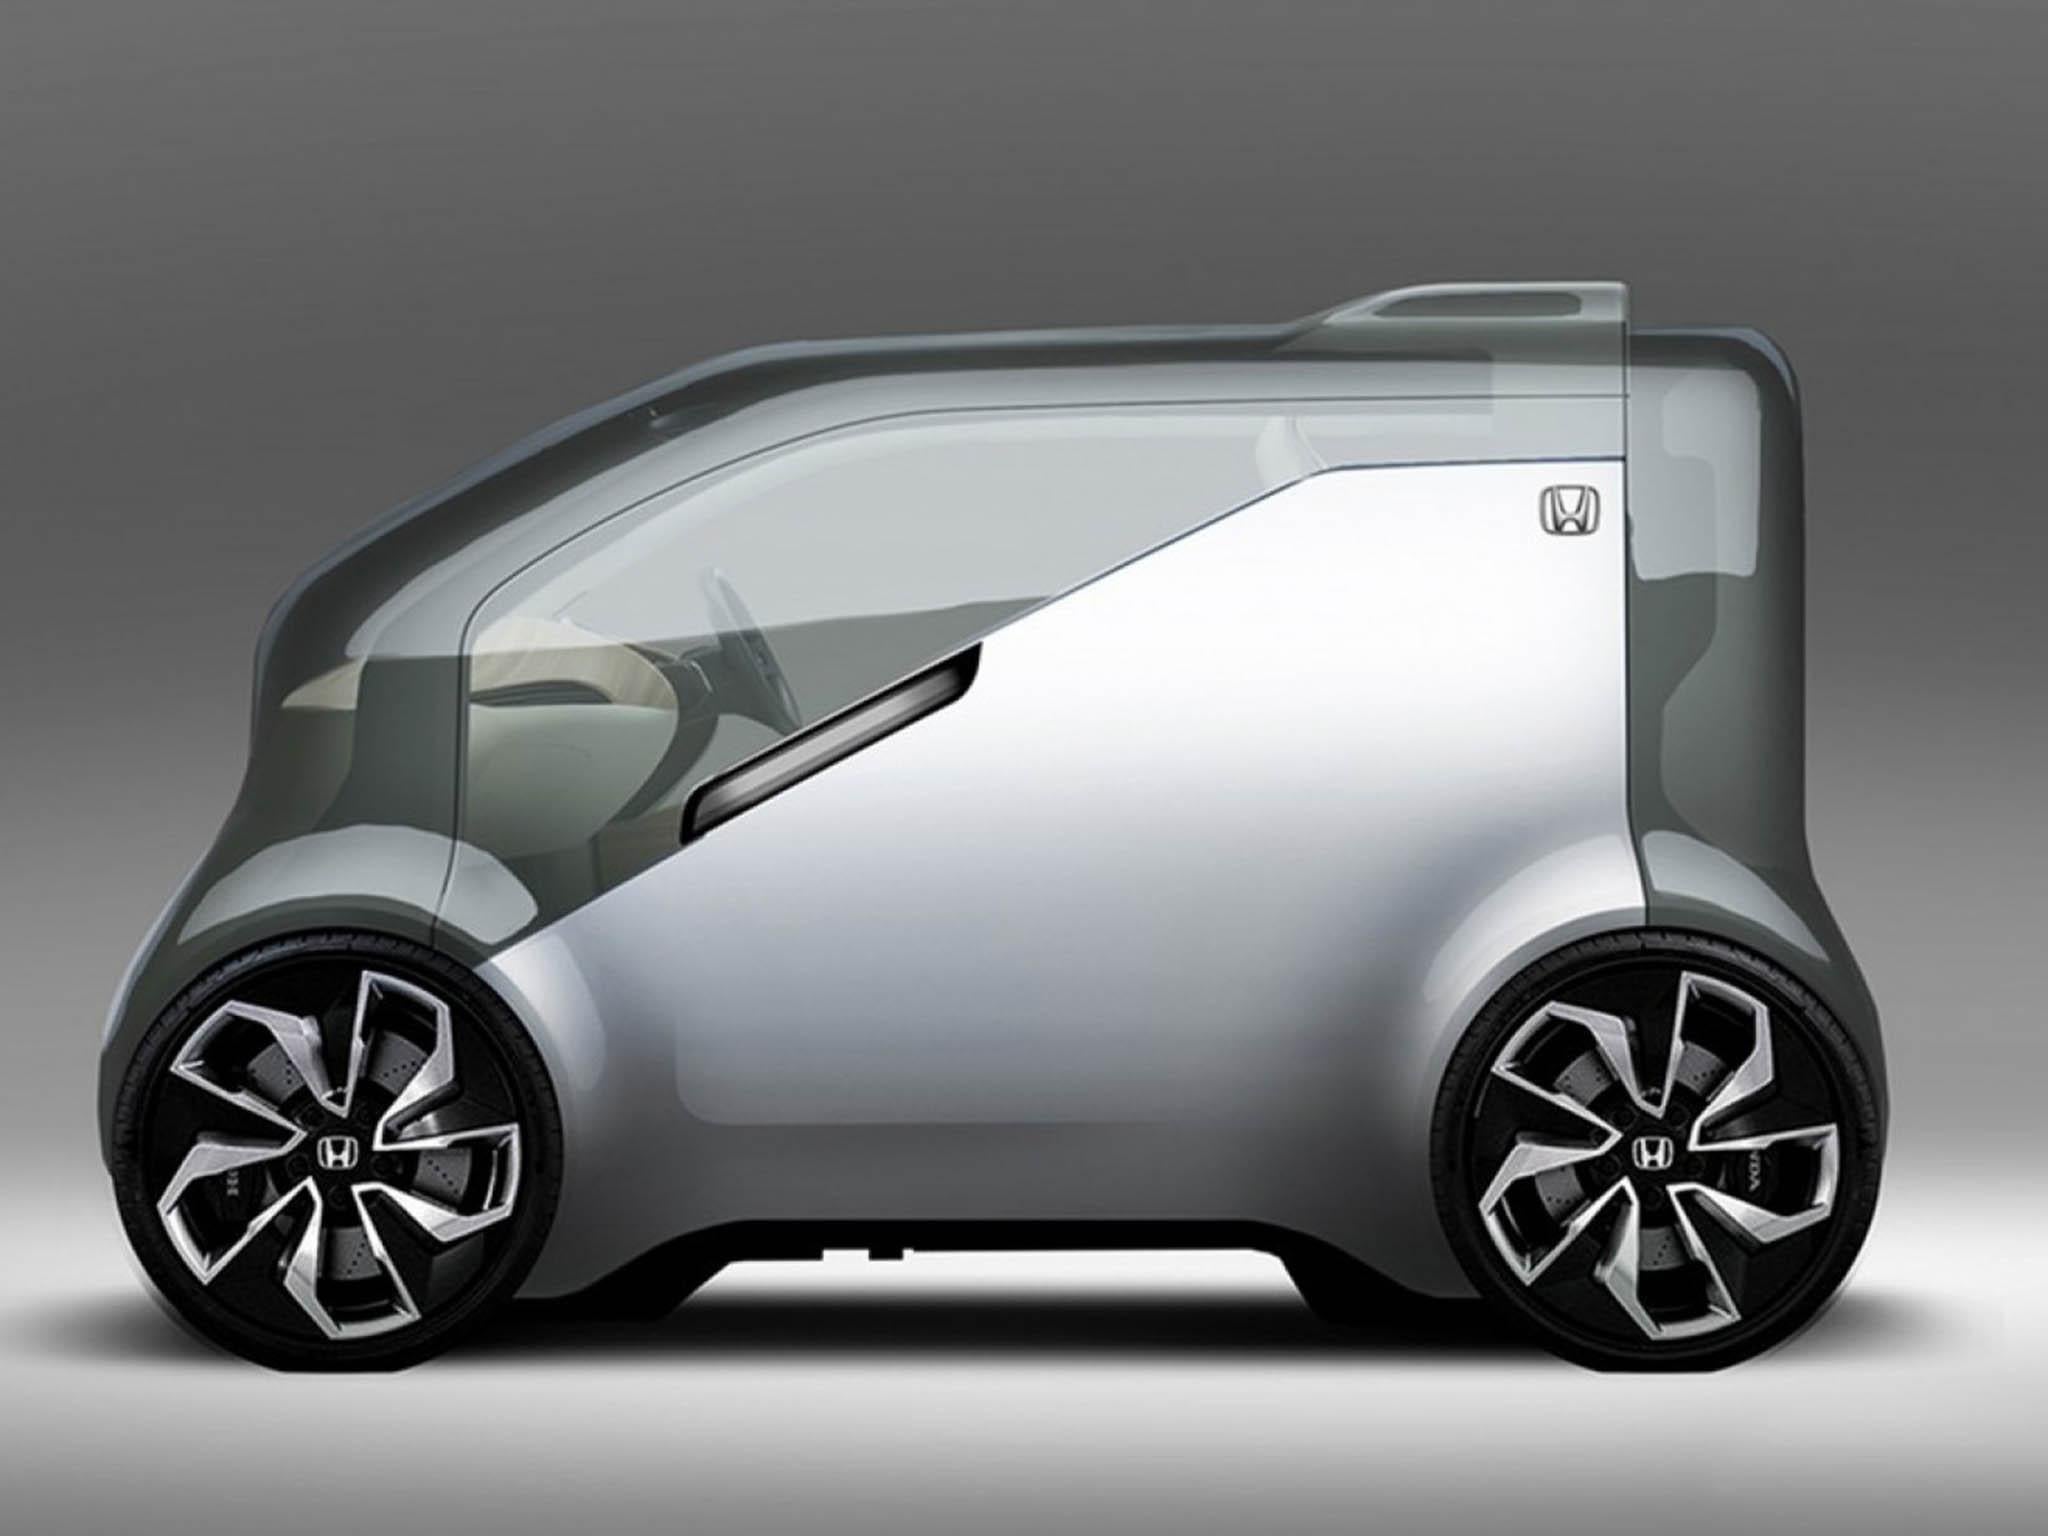 Honda plans to unveil the NeuV at the International Consumer Electronics Show in January